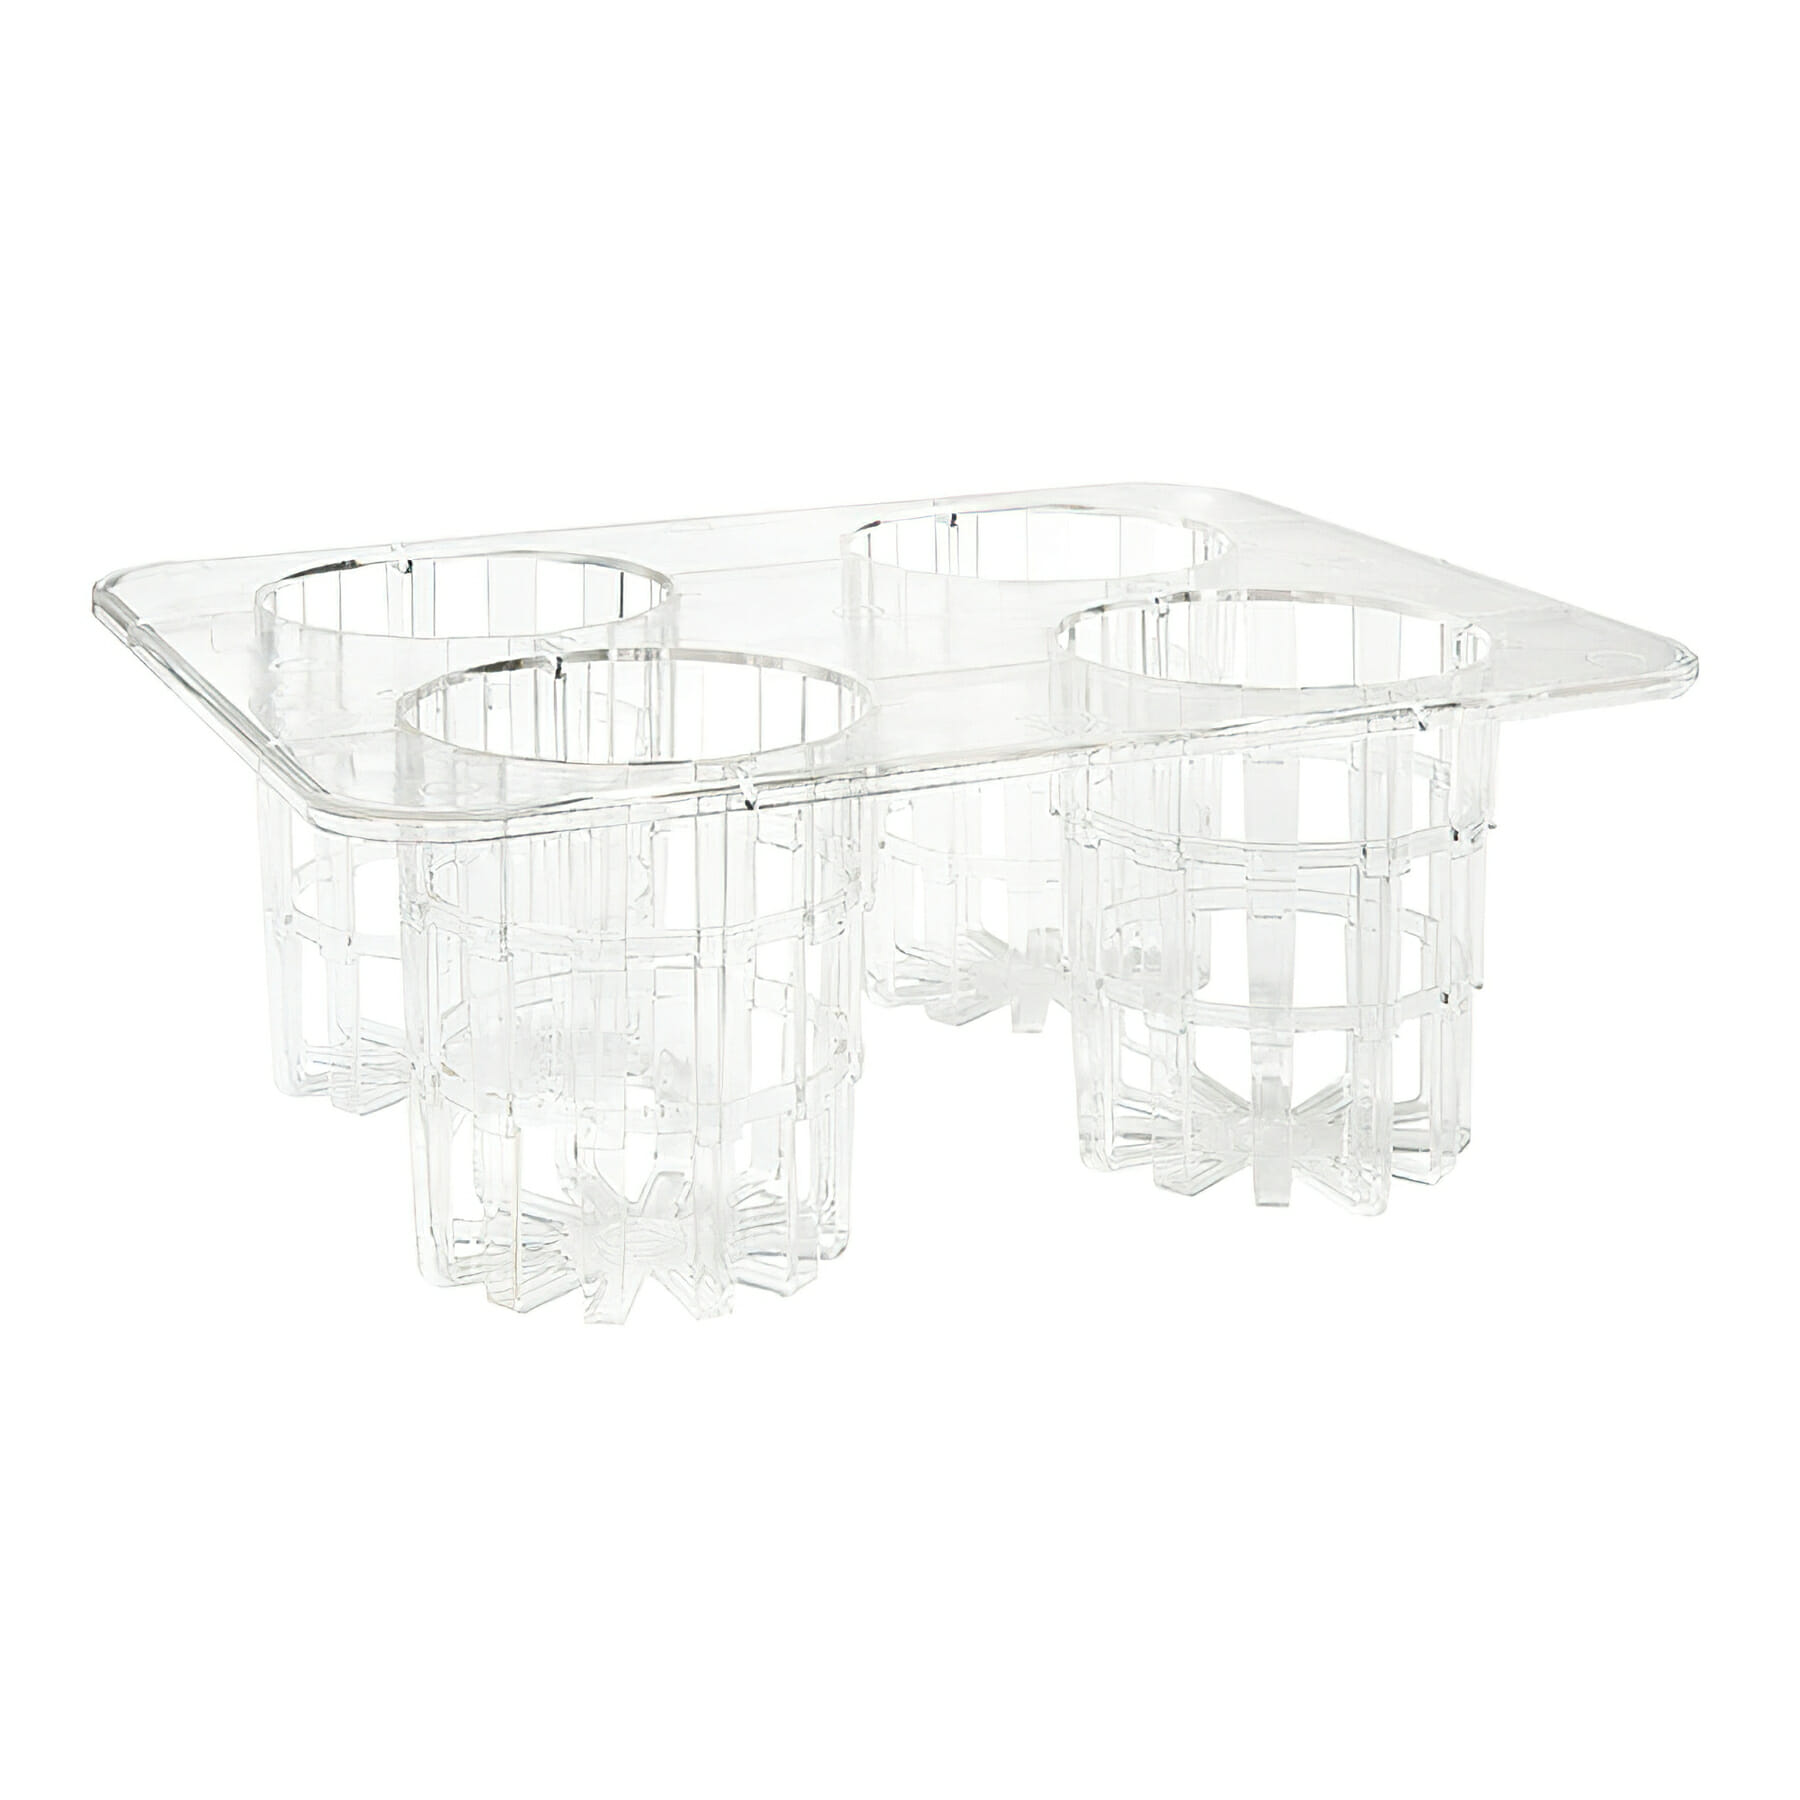 Rack w/4 Slots for Salad Dressing Bottles (13" x 10.25" x 5"), Clear